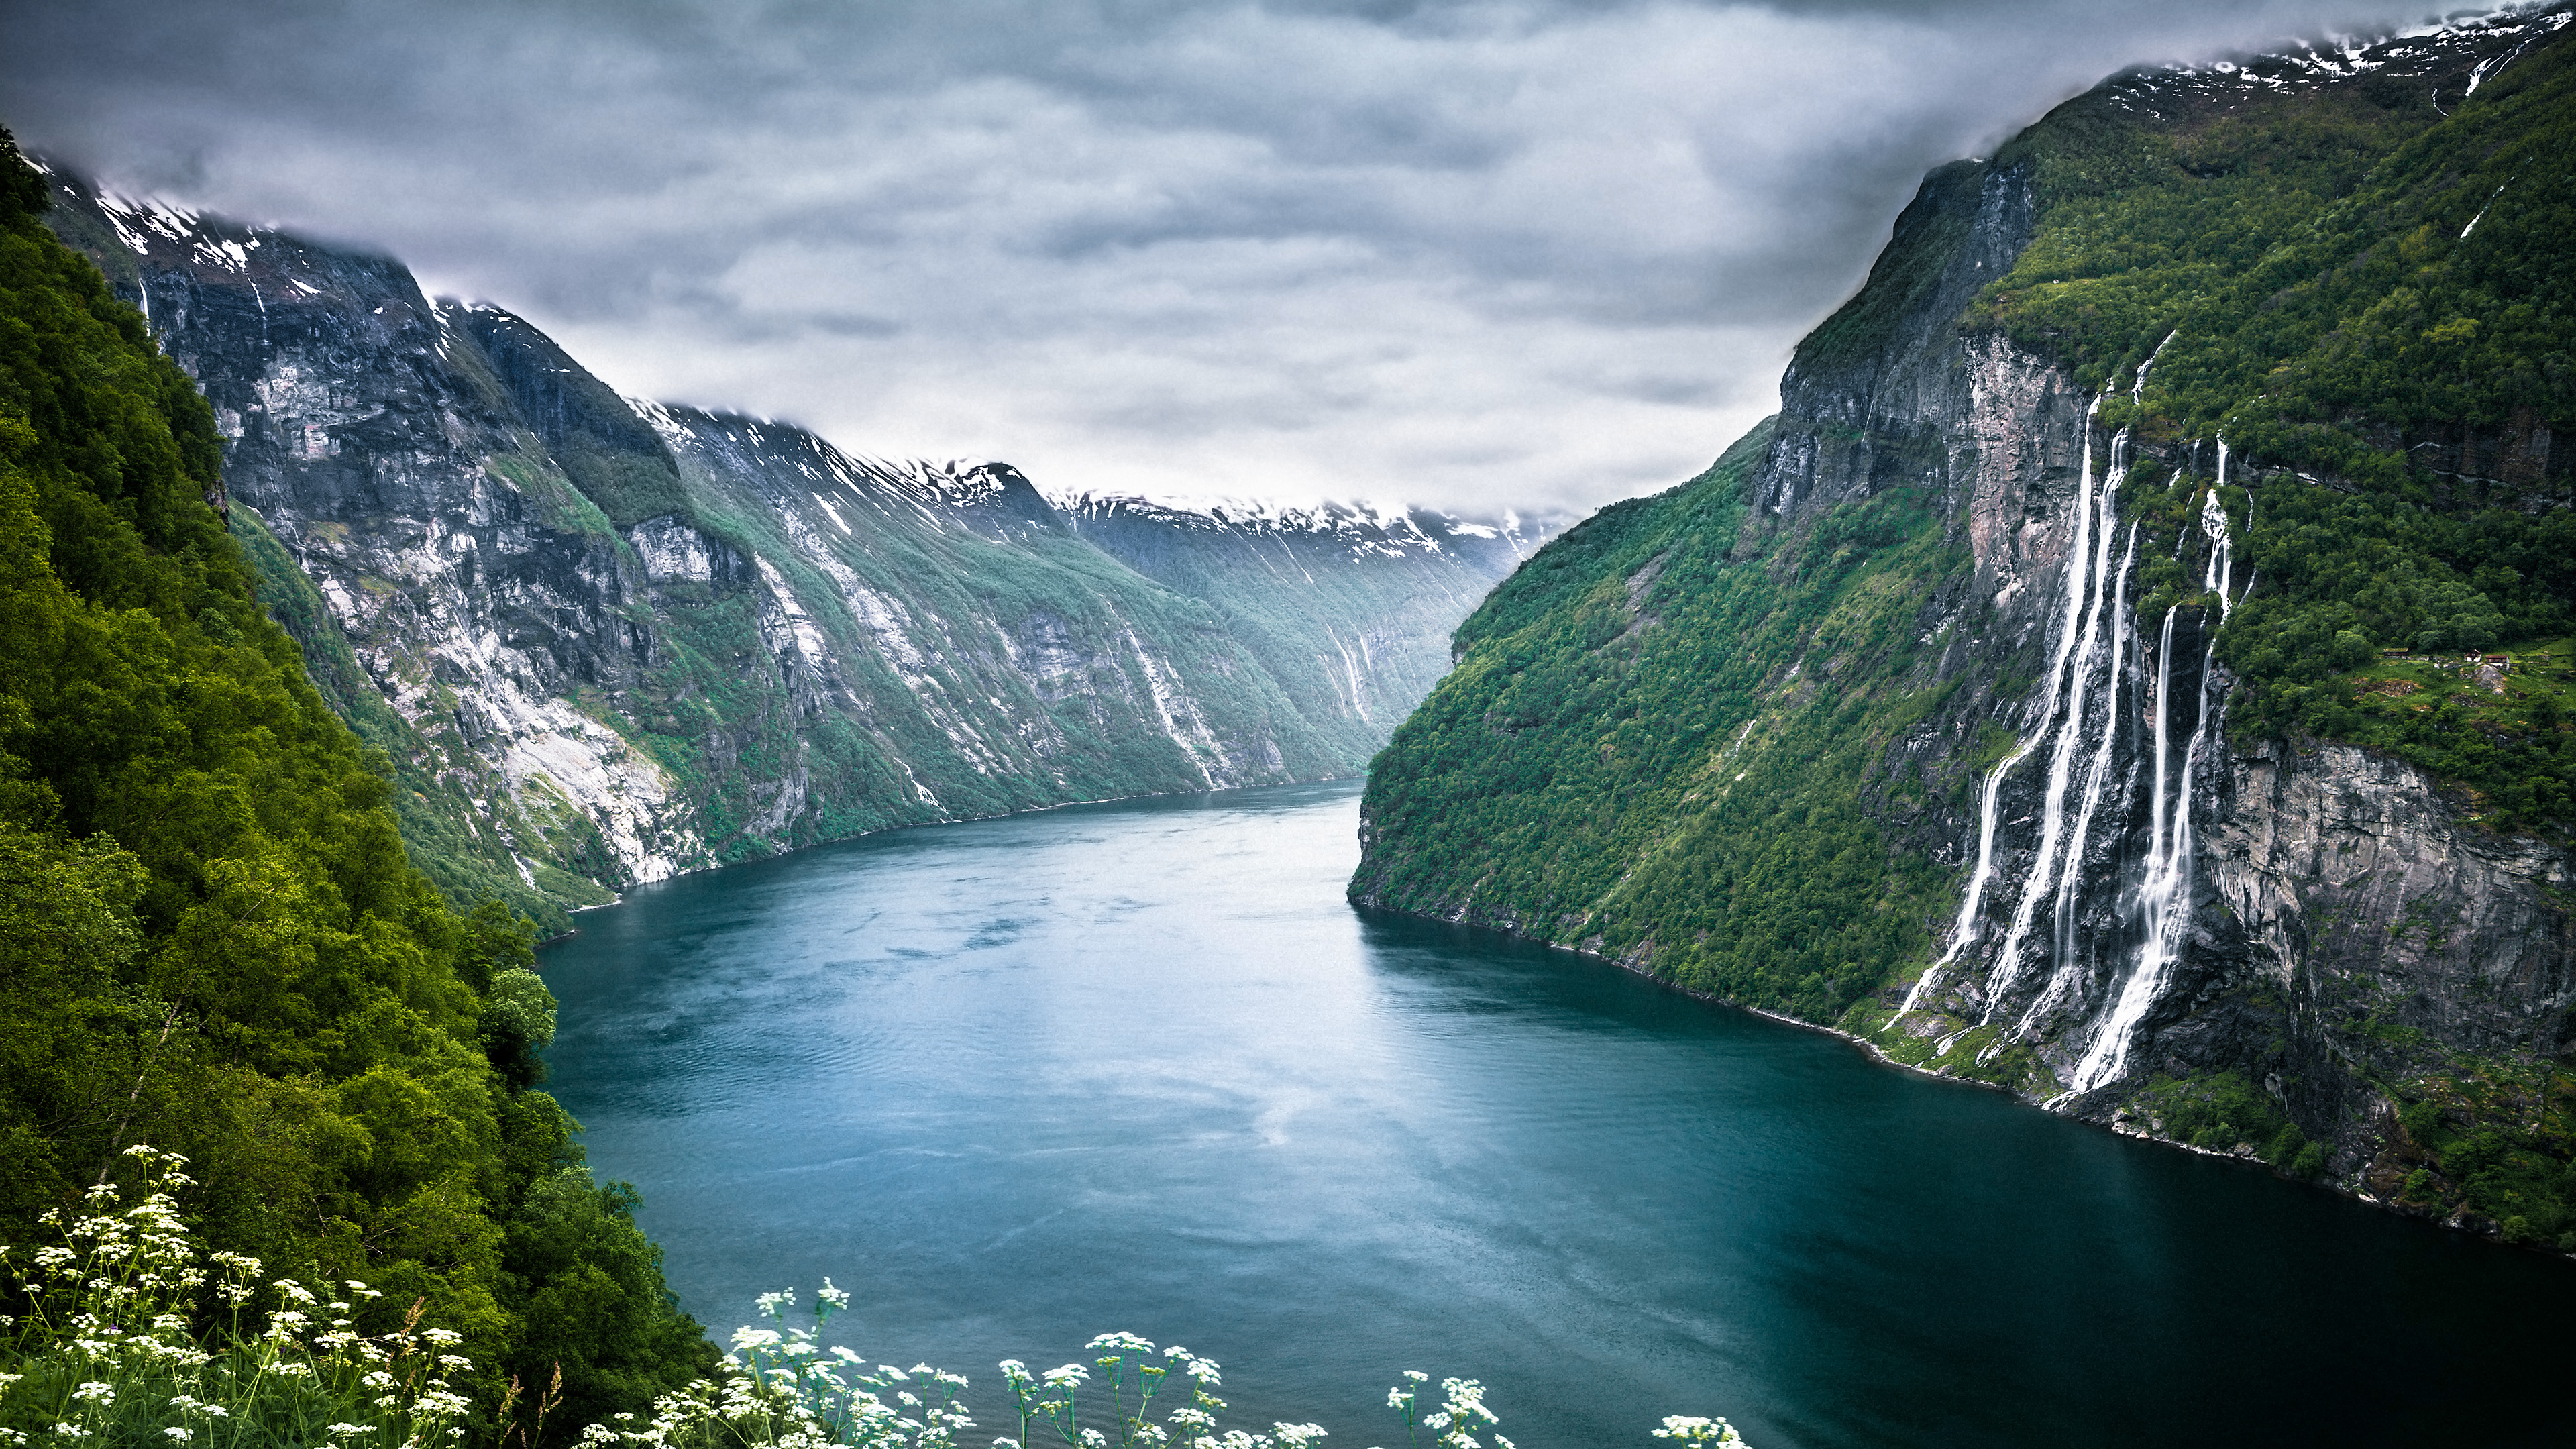 nature wallpaper 1920x1080,natural landscape,fjord,body of water,nature,water resources